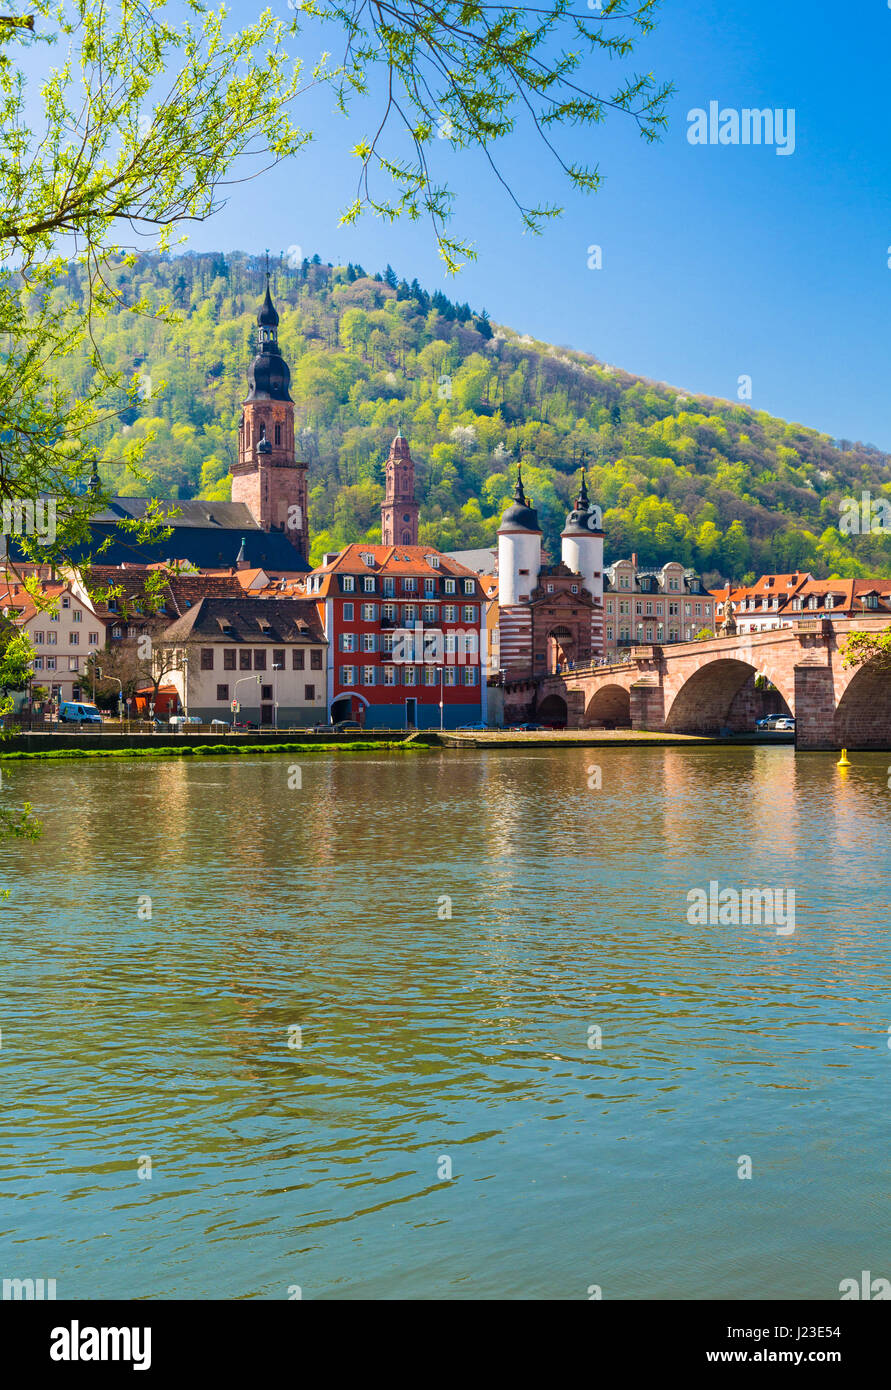 Old town of Heidelberg, Germany from riverbank of River Neckar Stock Photo